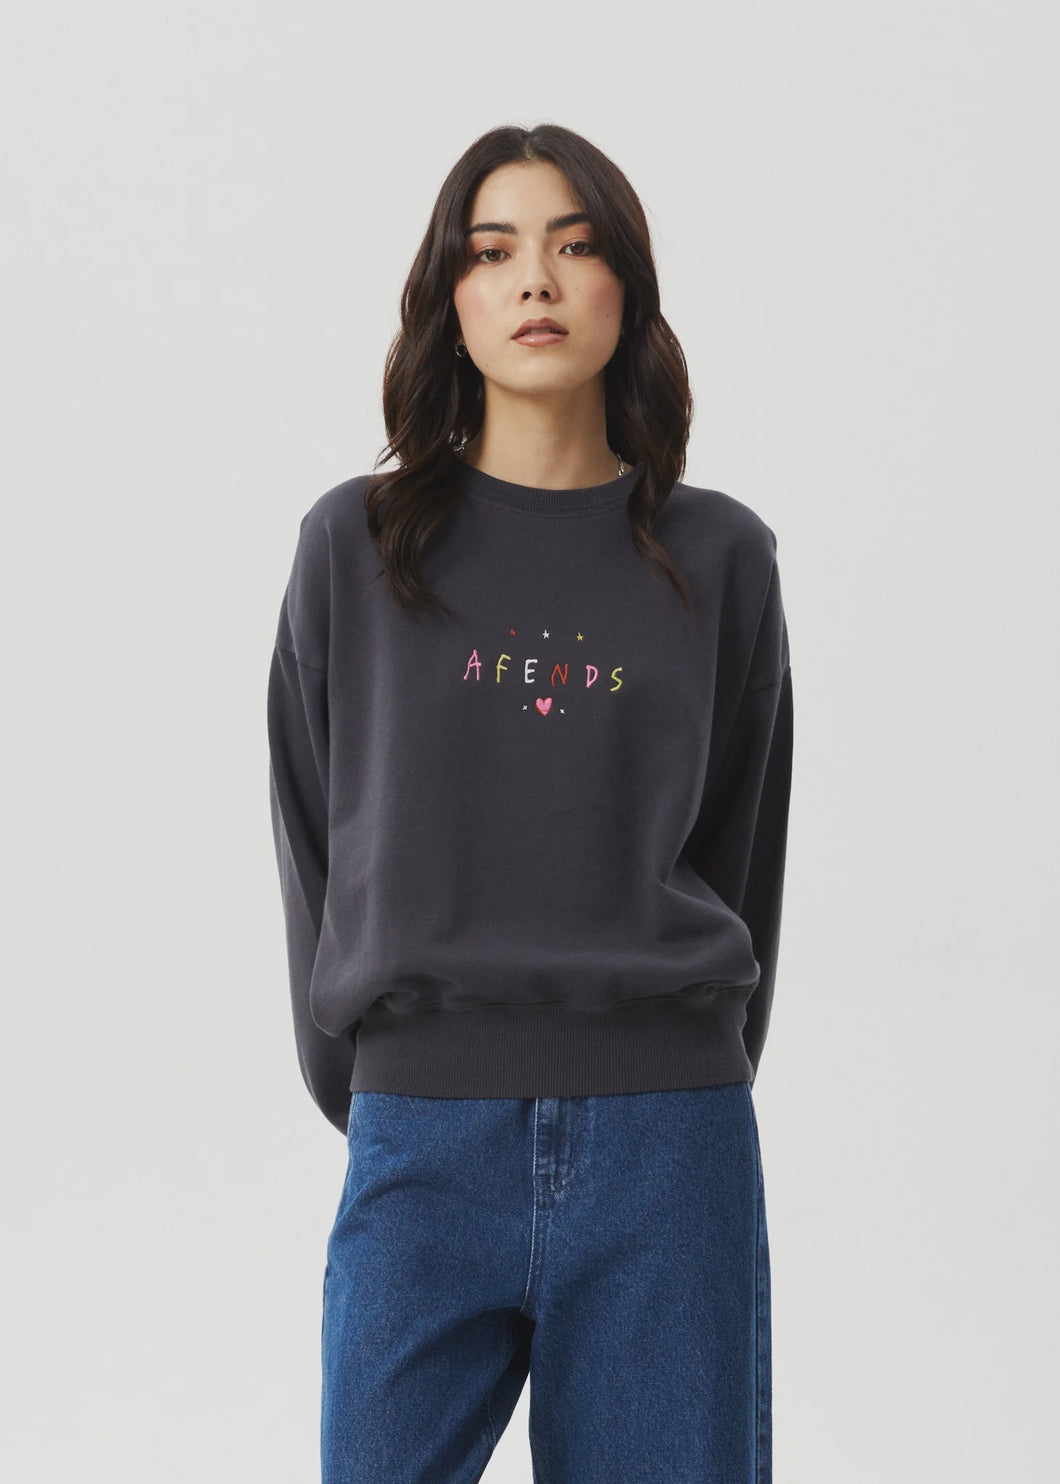 Afends Funhouse Crew Neck Sweater - Charcoal